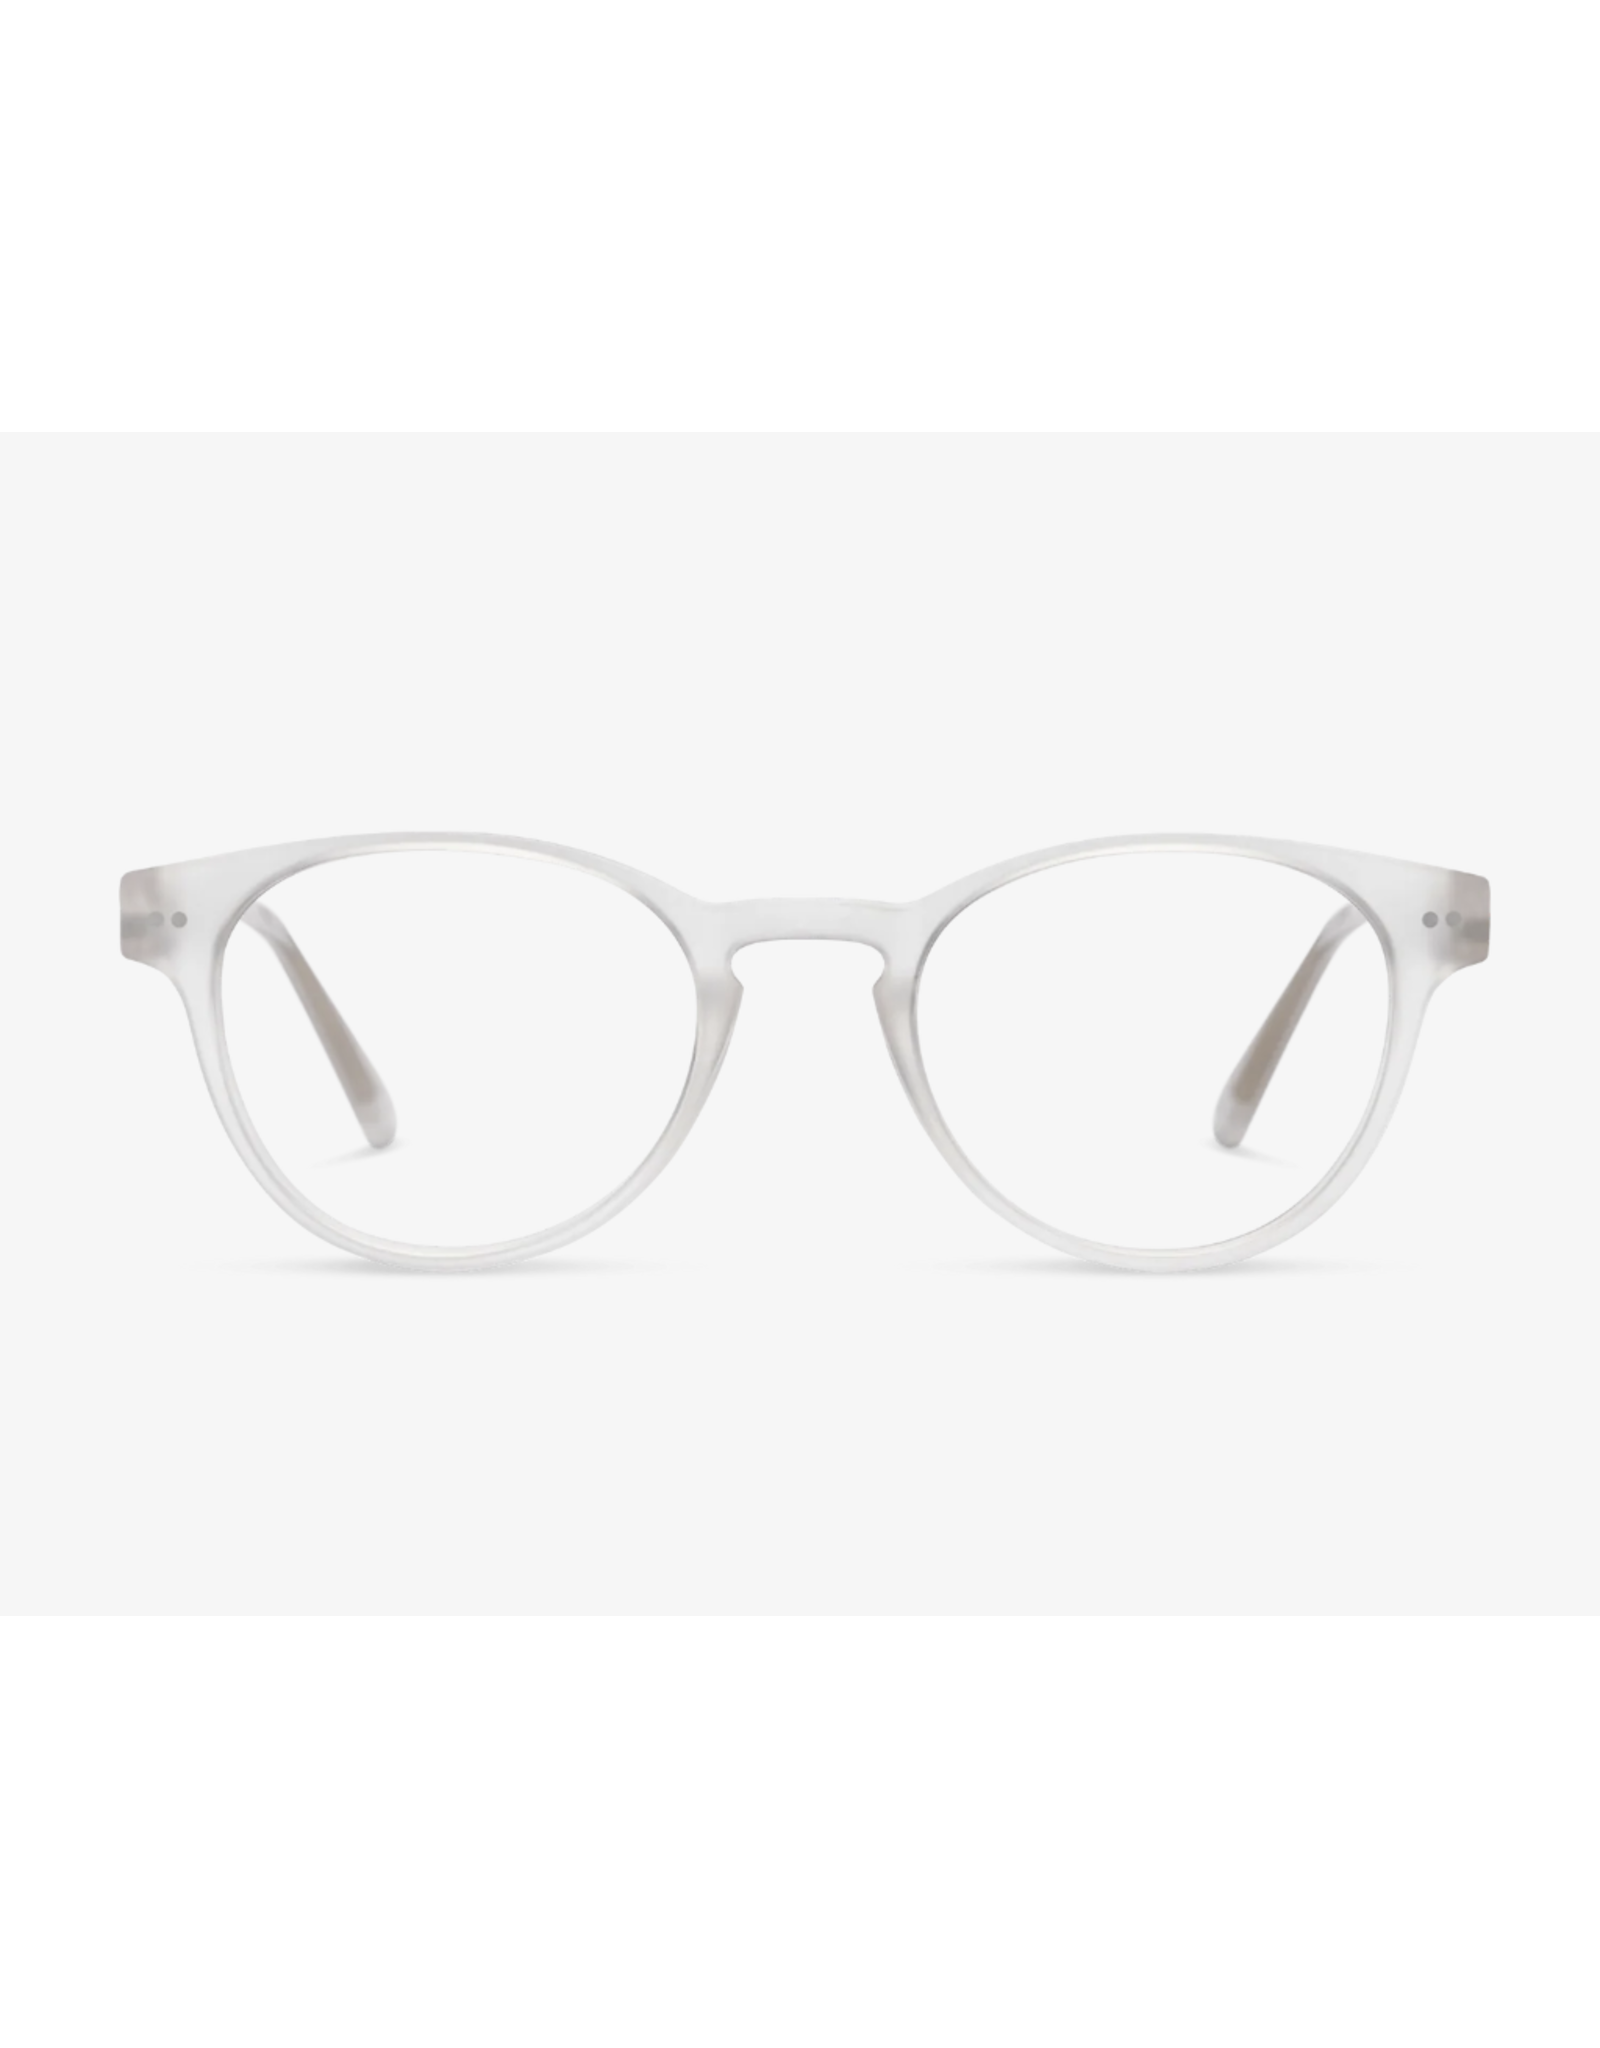 LOOK Abbey Readers in Clear, 2.0 Magnification